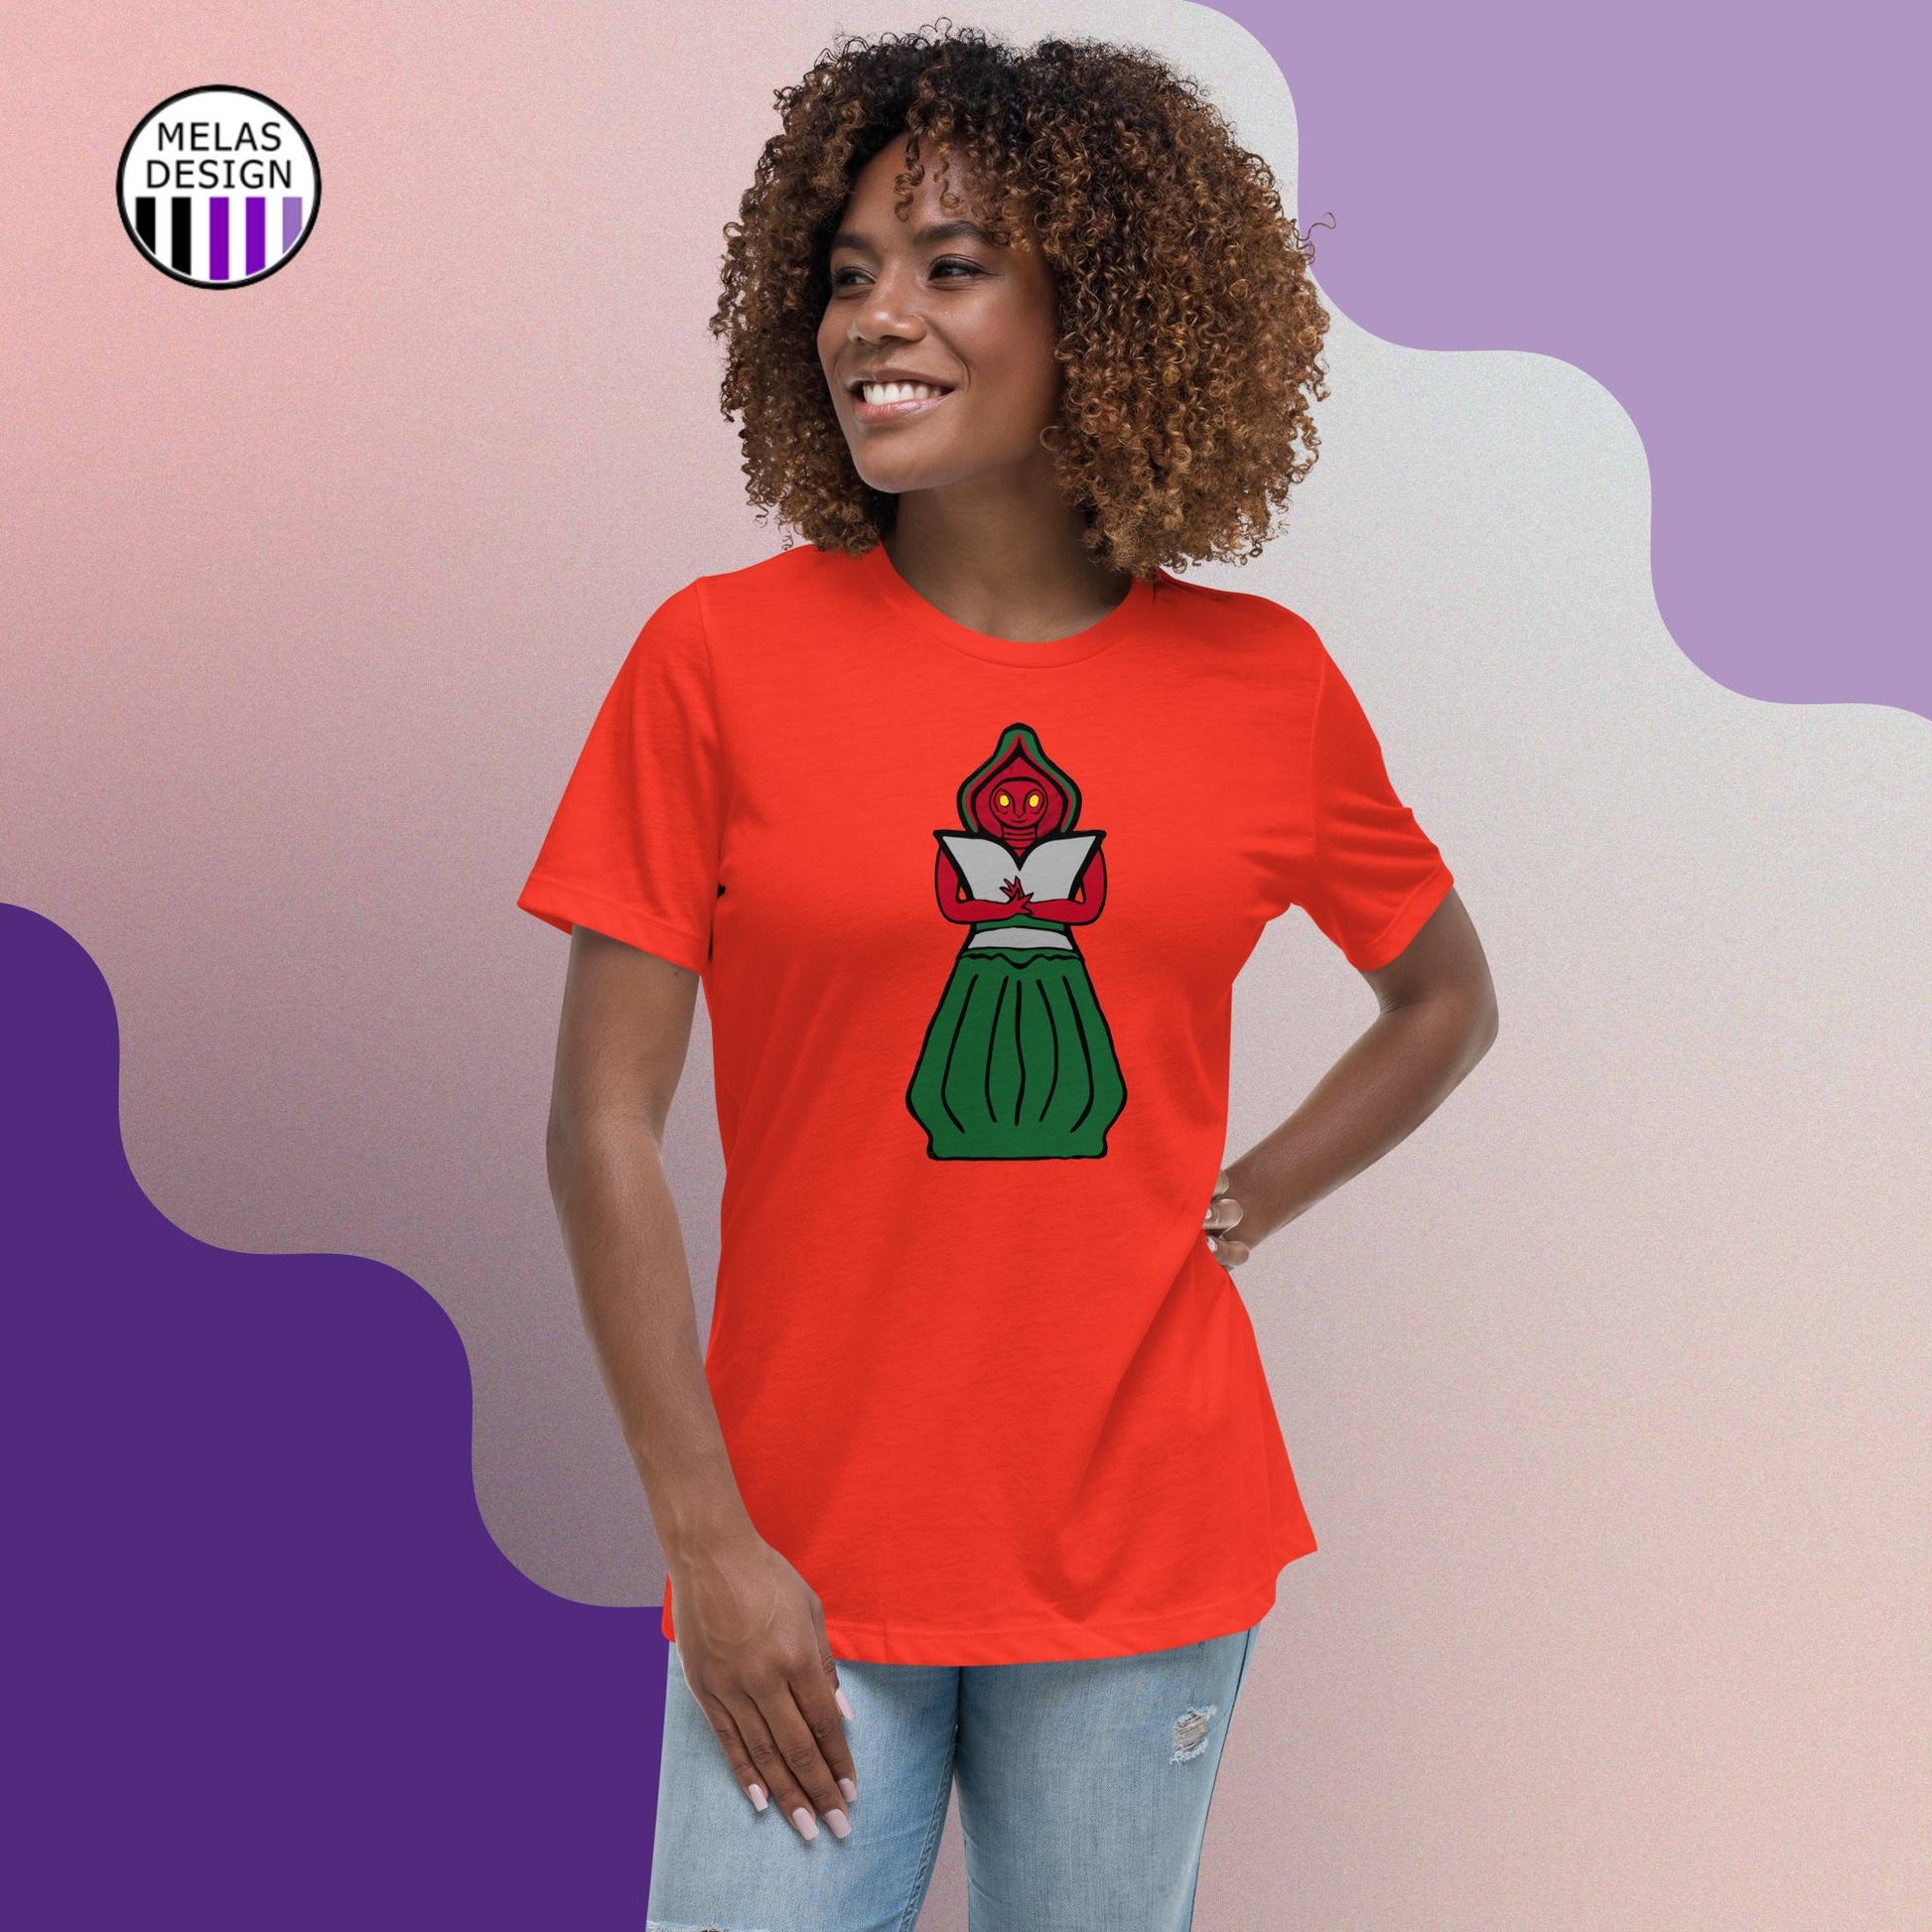 Braxie; Braxton County Monster; Flatwoods Monster; t-shirts; style; gift idea; small business; s-3xl; paranormal; mountain monster